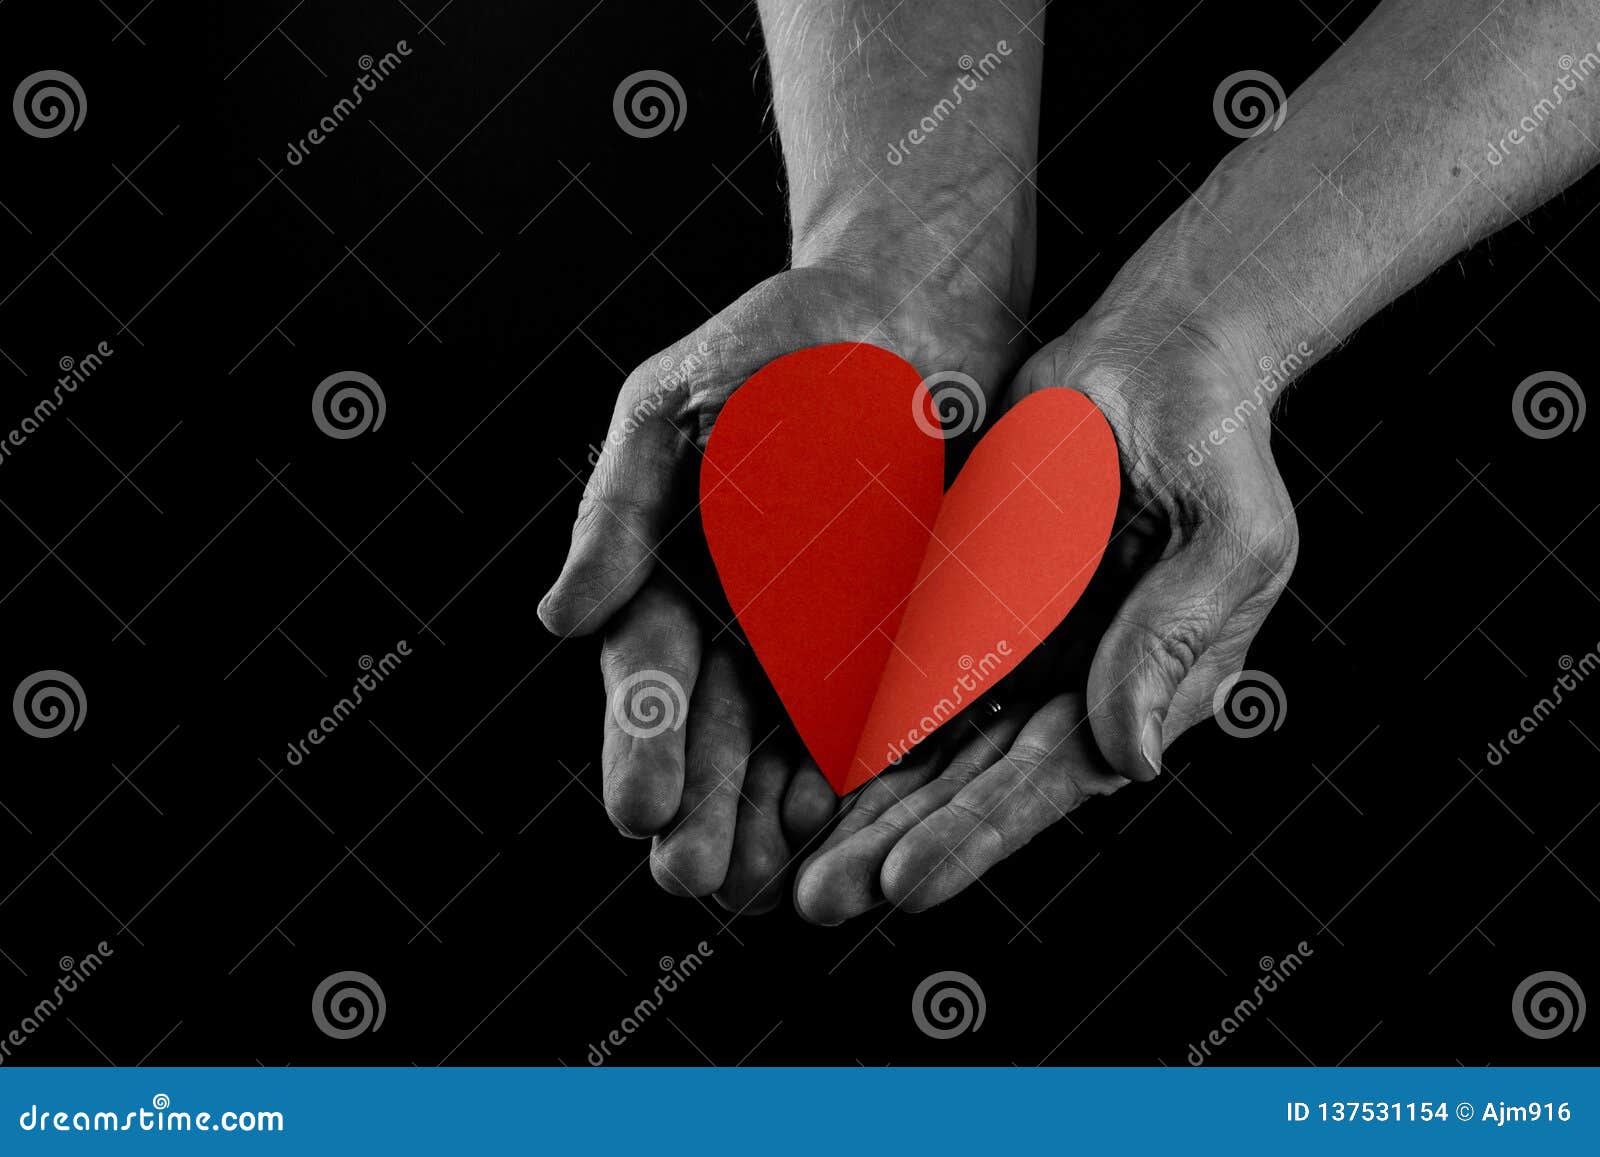 helping hand concept, man`s hands palms up holding a red heart, giving love, care and support, reaching out. side view